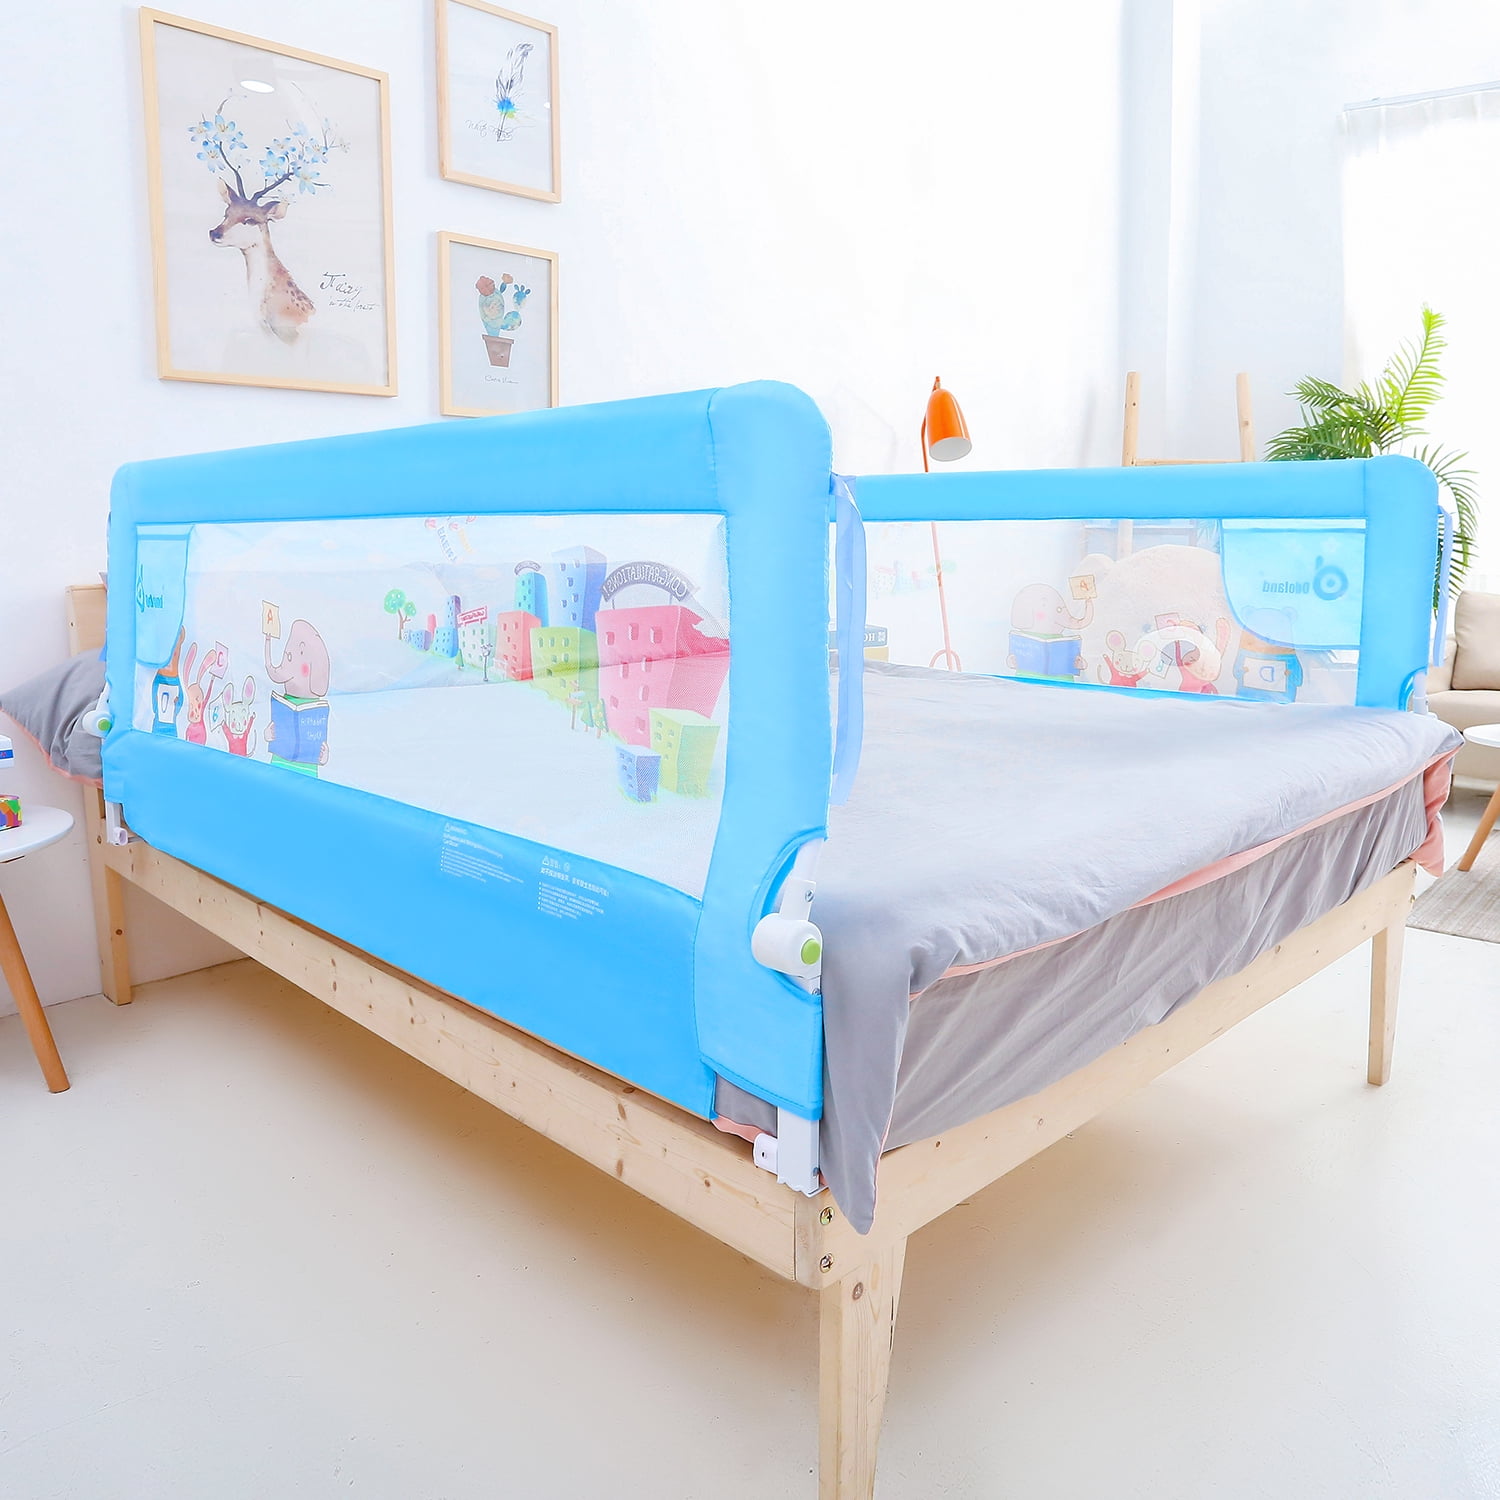 the baby bed